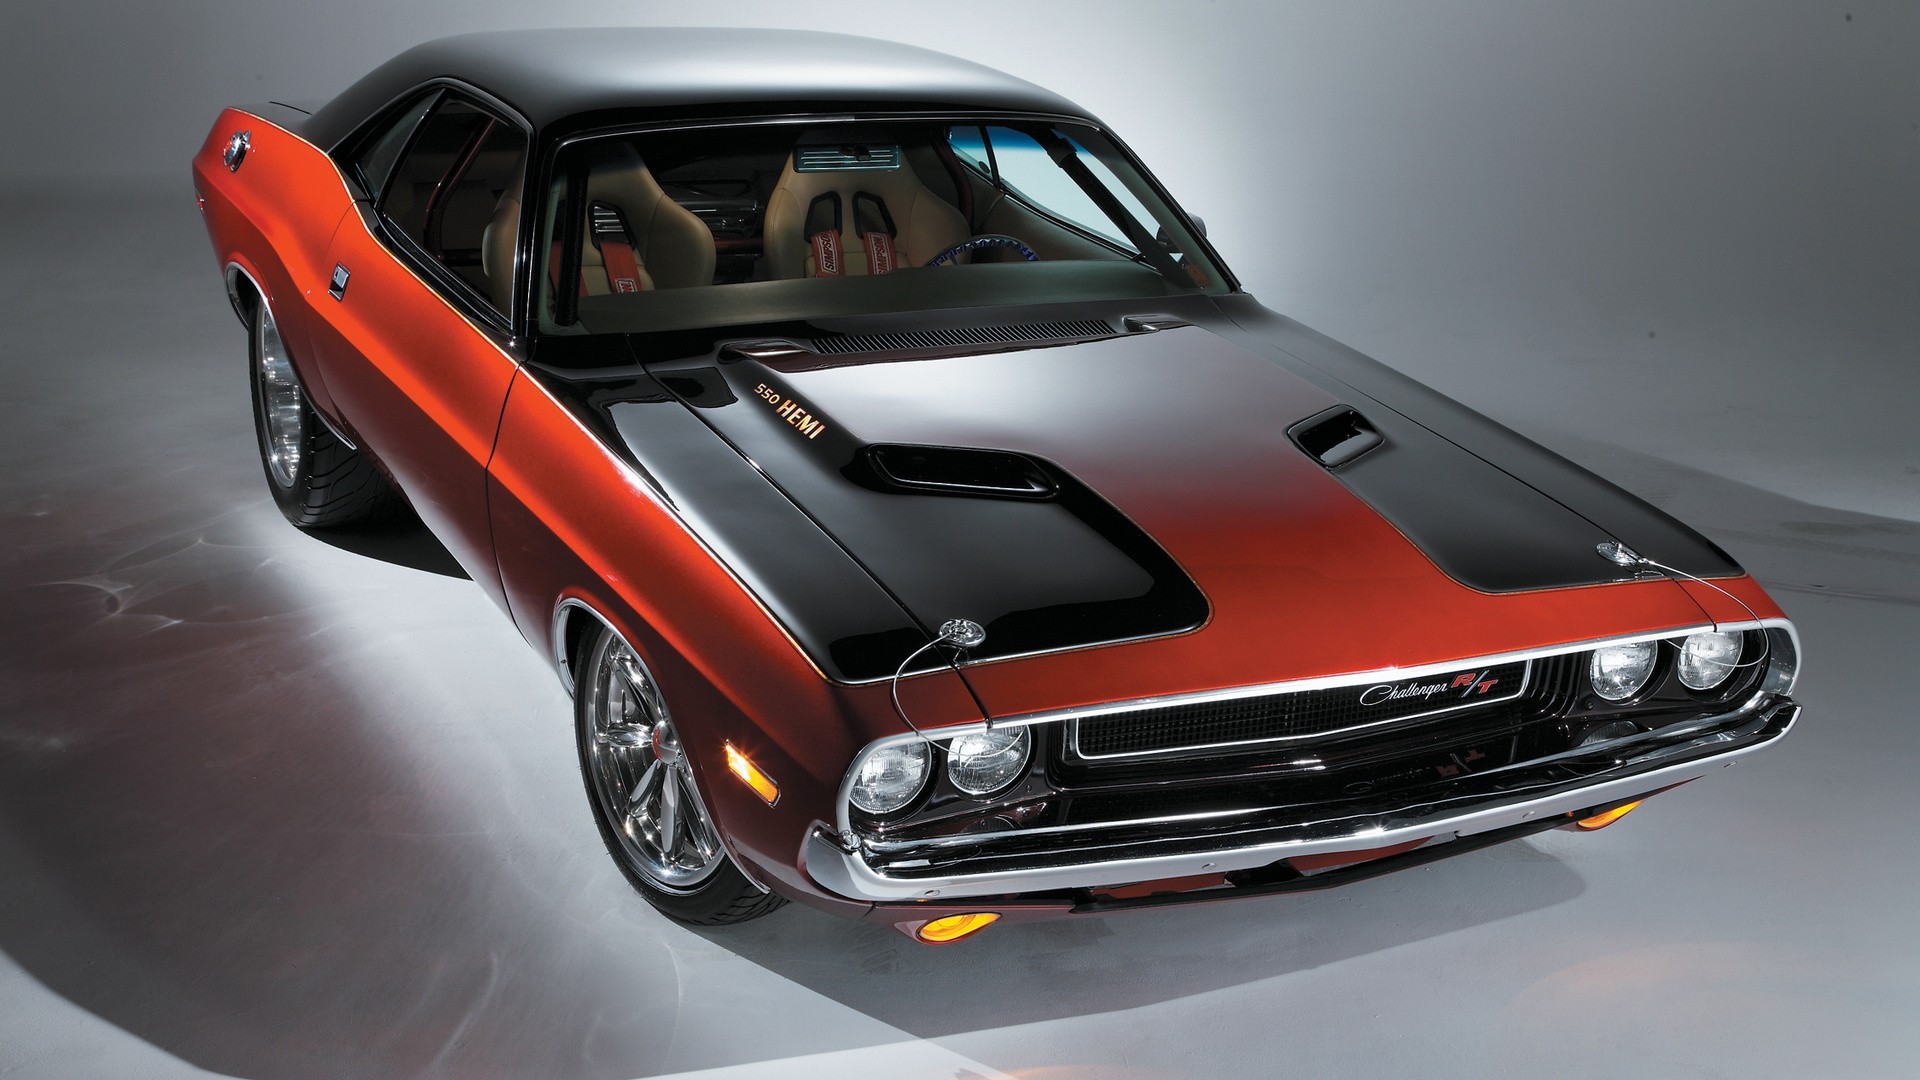 General 1920x1080 car Dodge Challenger Dodge vehicle red cars muscle cars American cars classic car